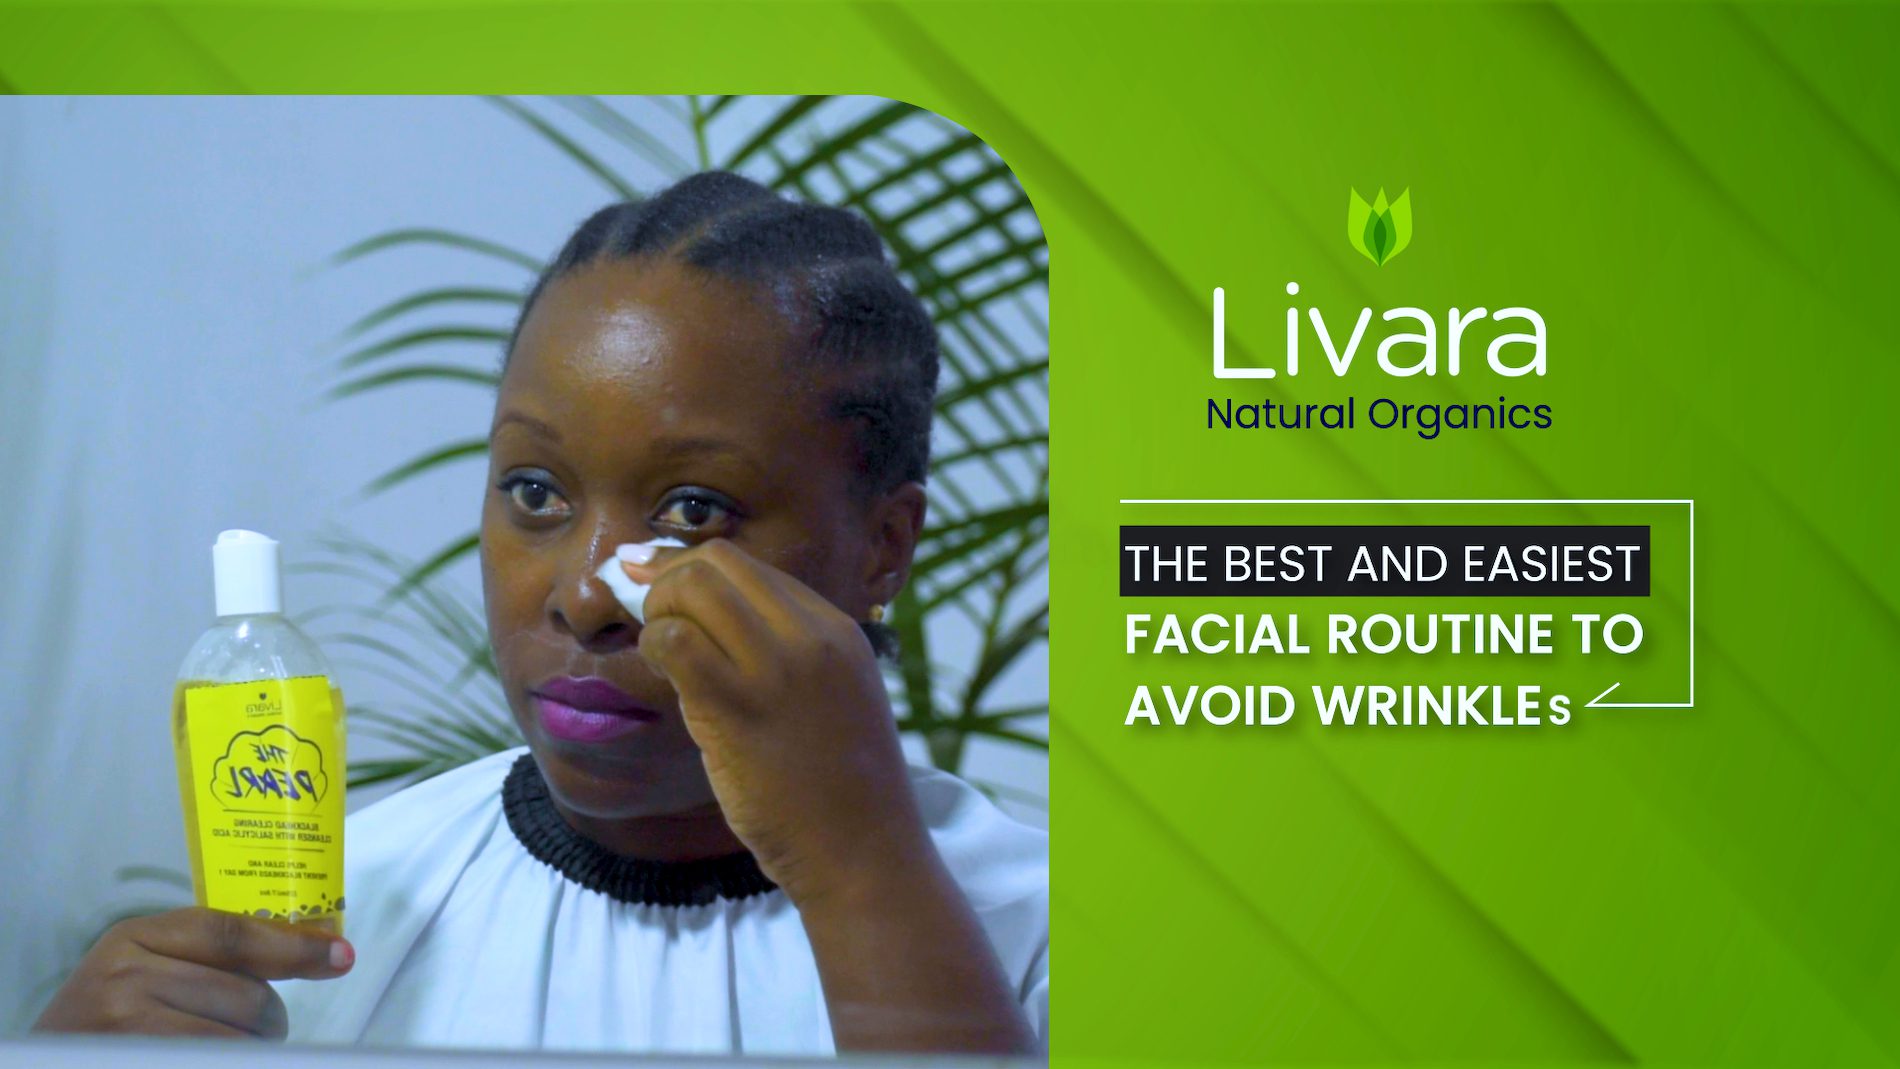 The best and easiest facial routine to avoid wrinkles - Livara